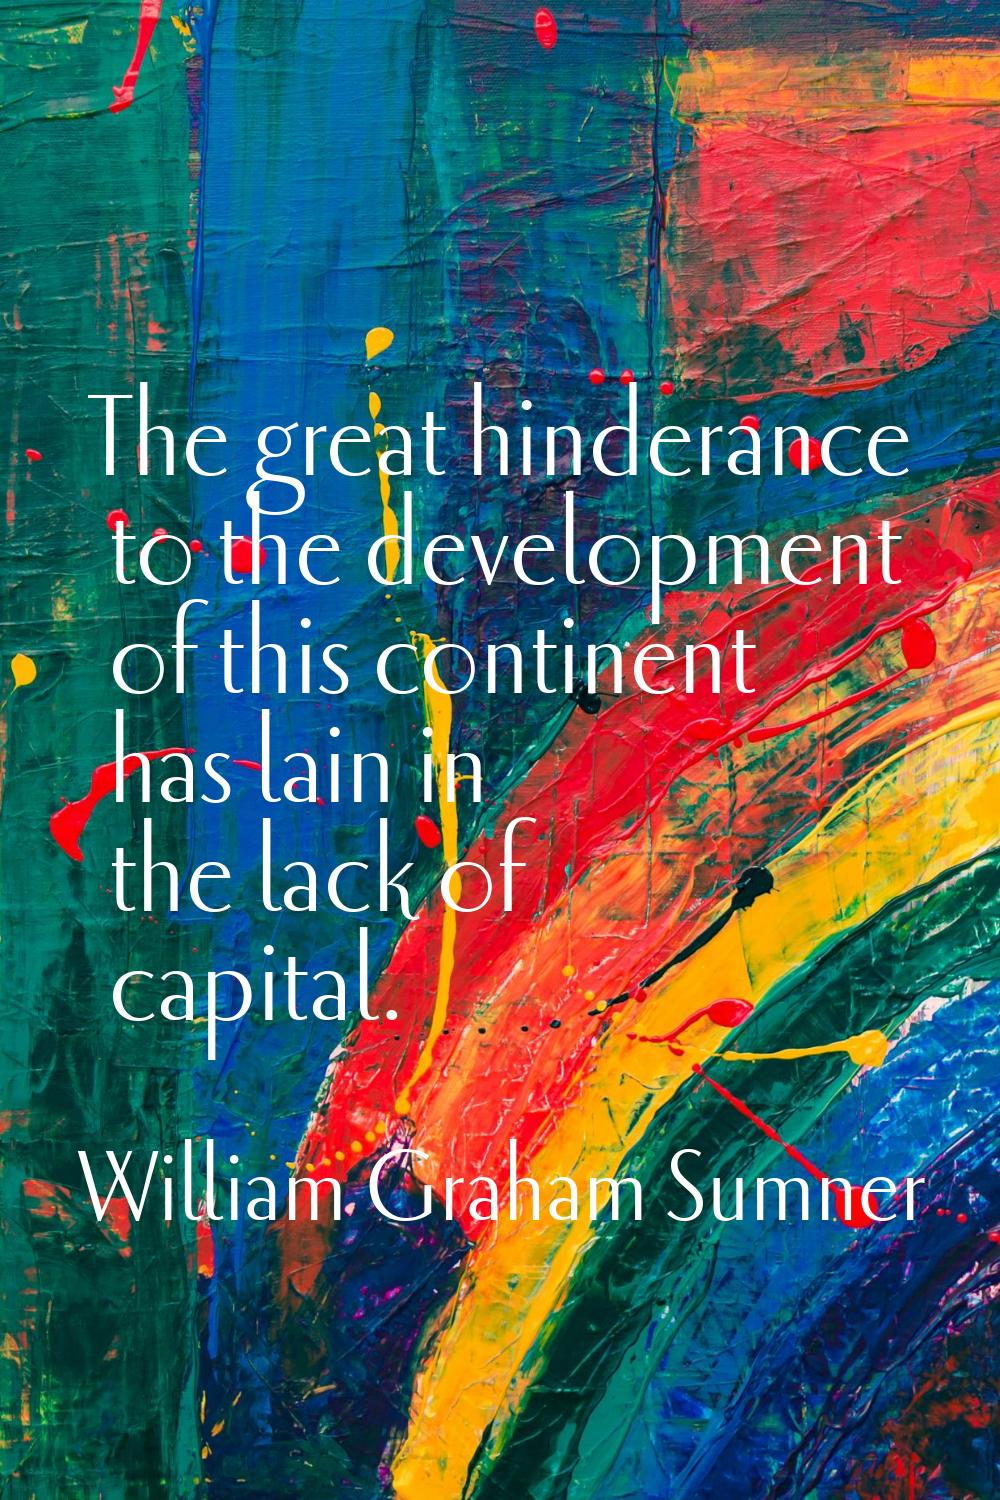 The great hinderance to the development of this continent has lain in the lack of capital.